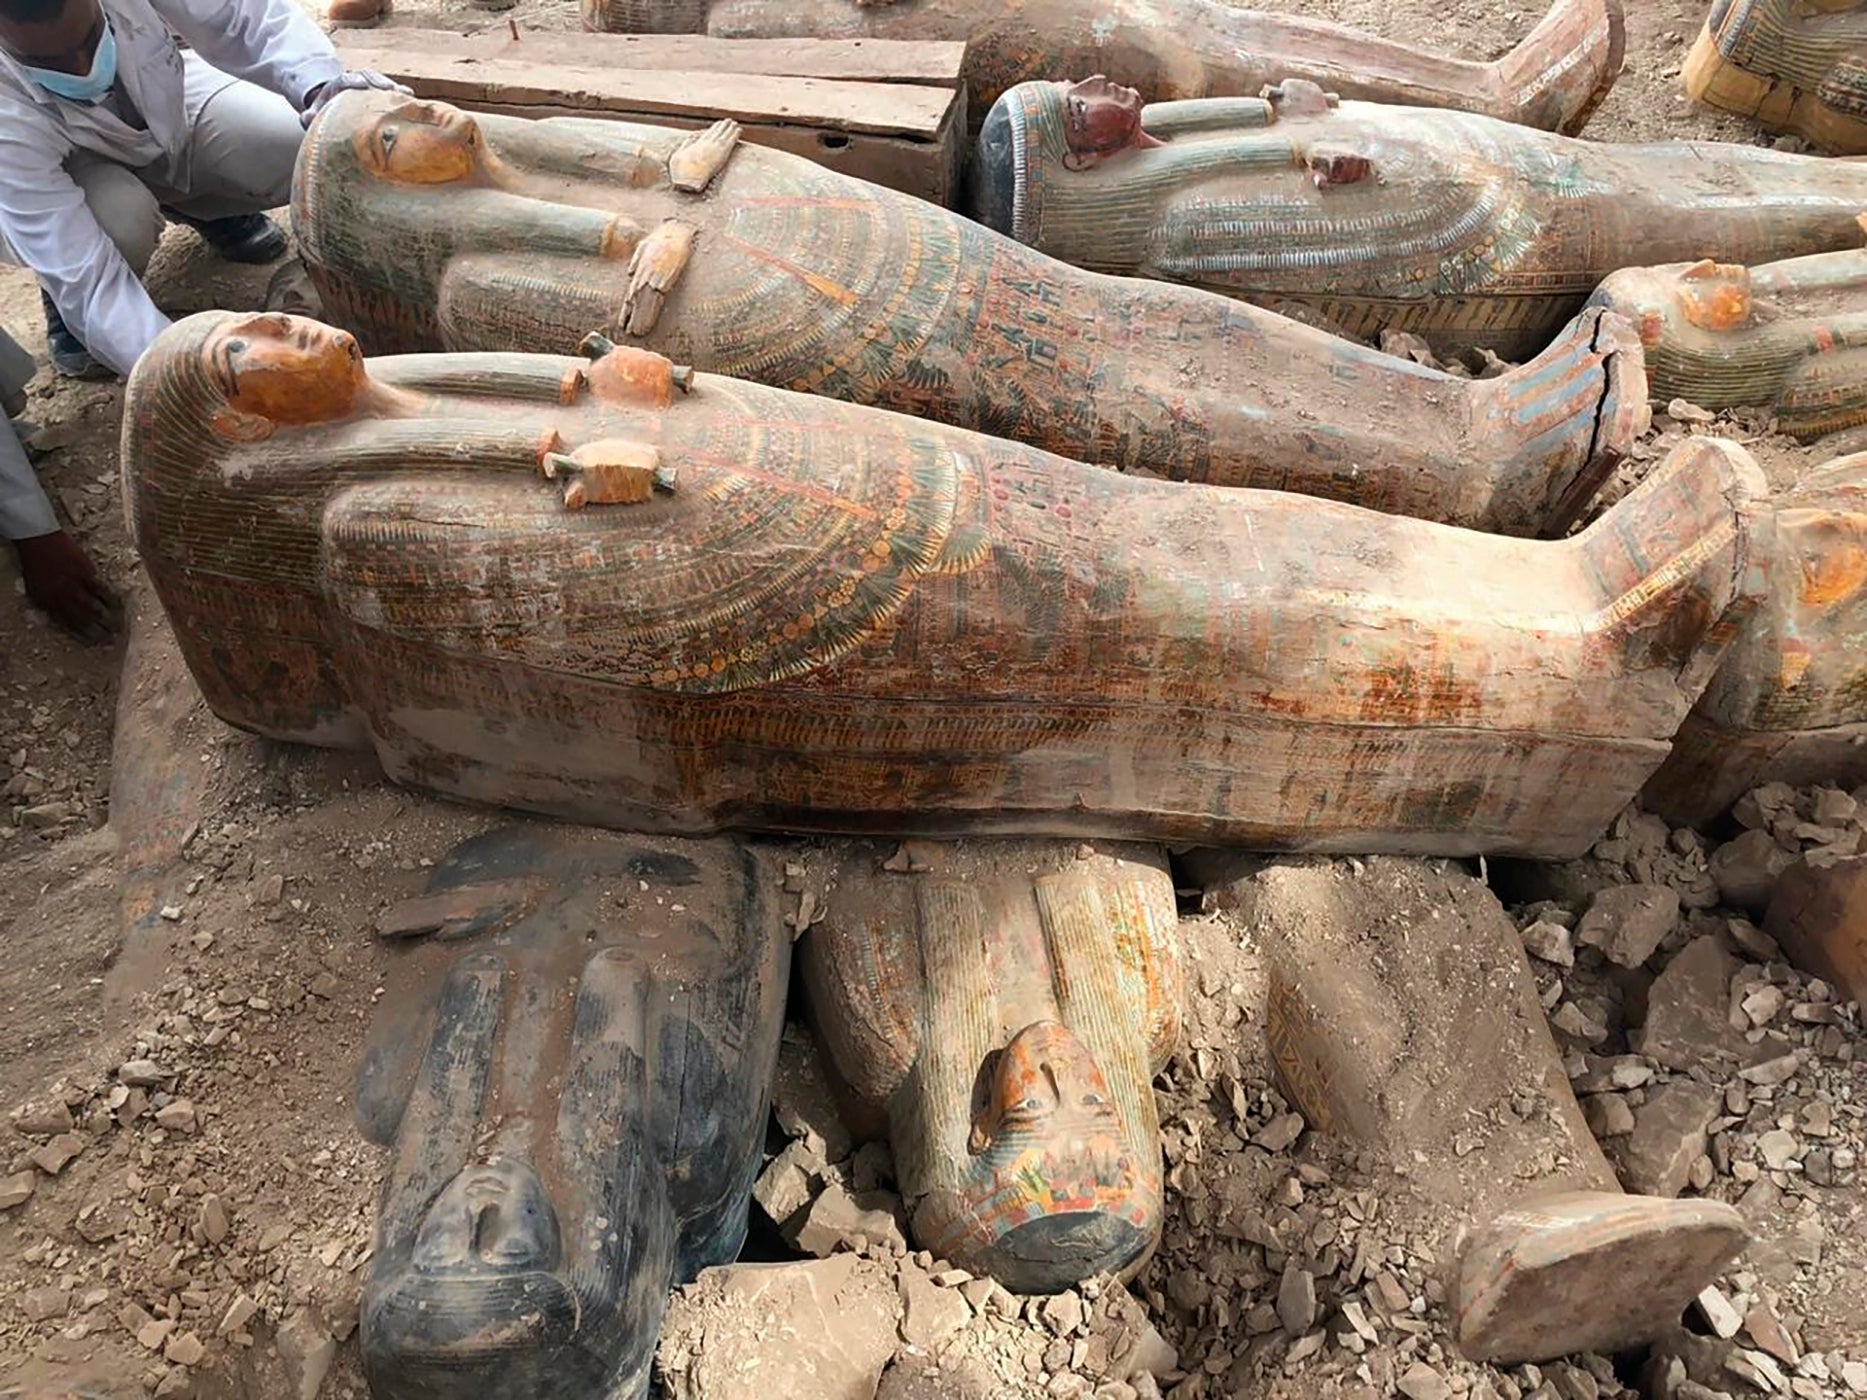 Perfectly preserved mummies in 3,000 year old colourful coffins discovered in Egypt